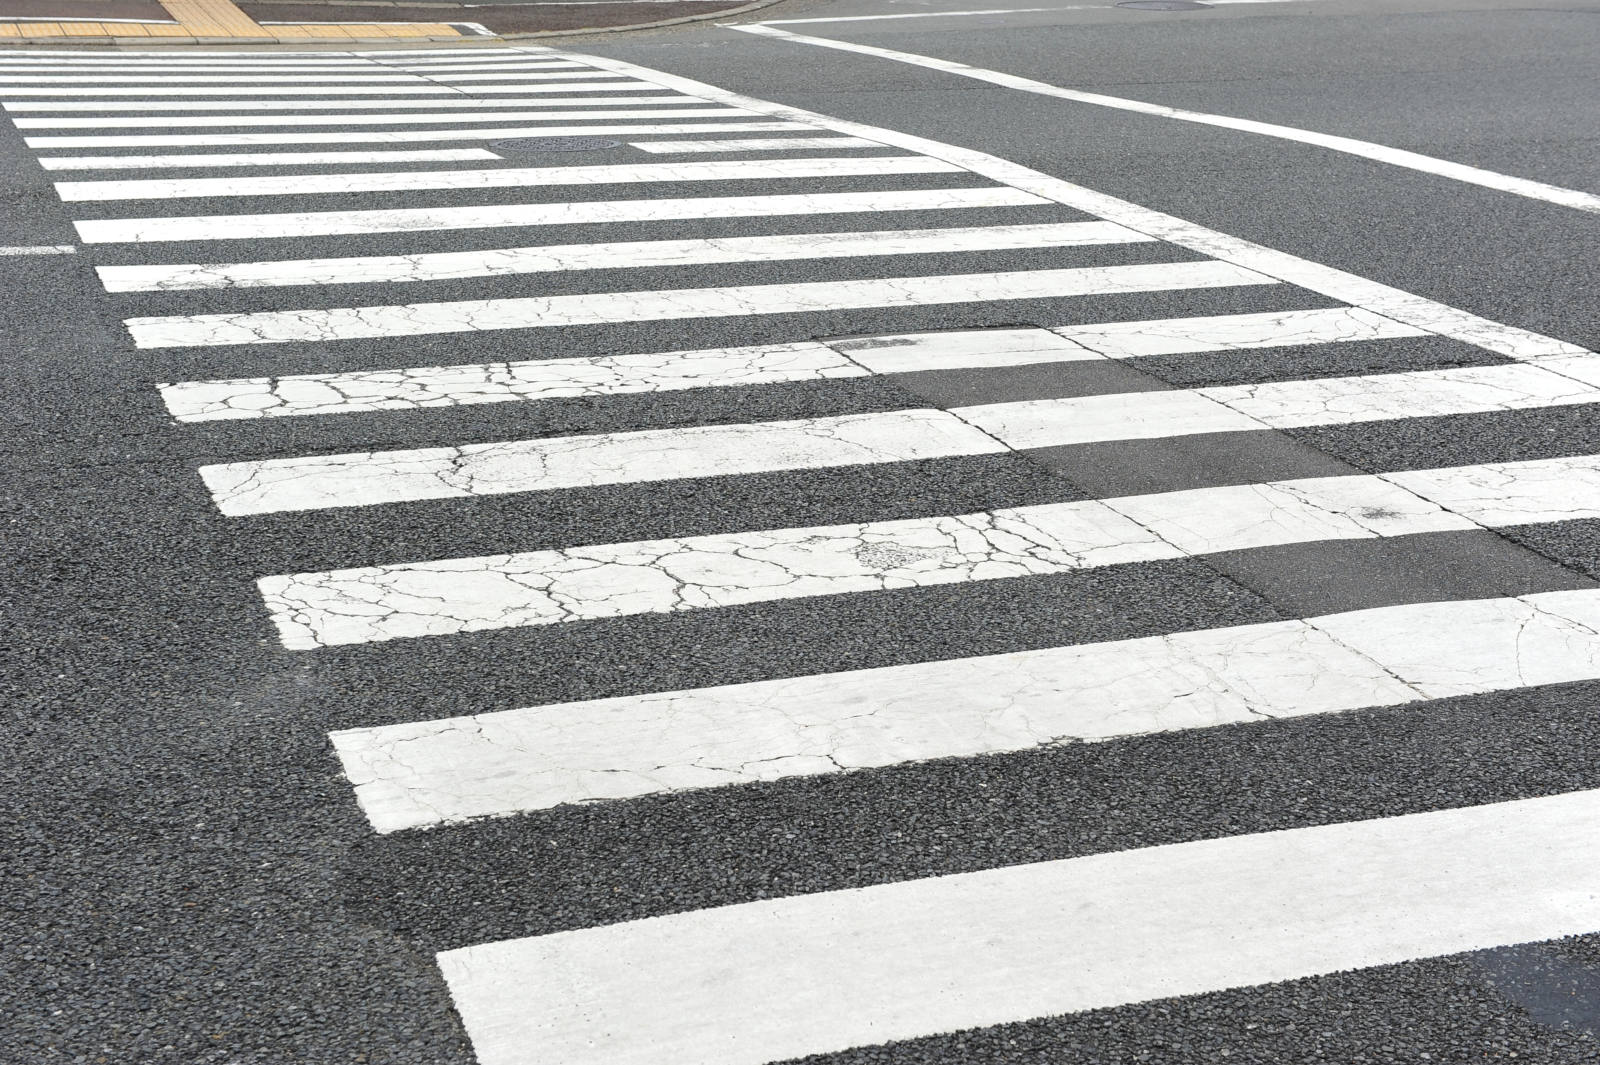 While crossing a road without zebra crossing, one must proceed only if